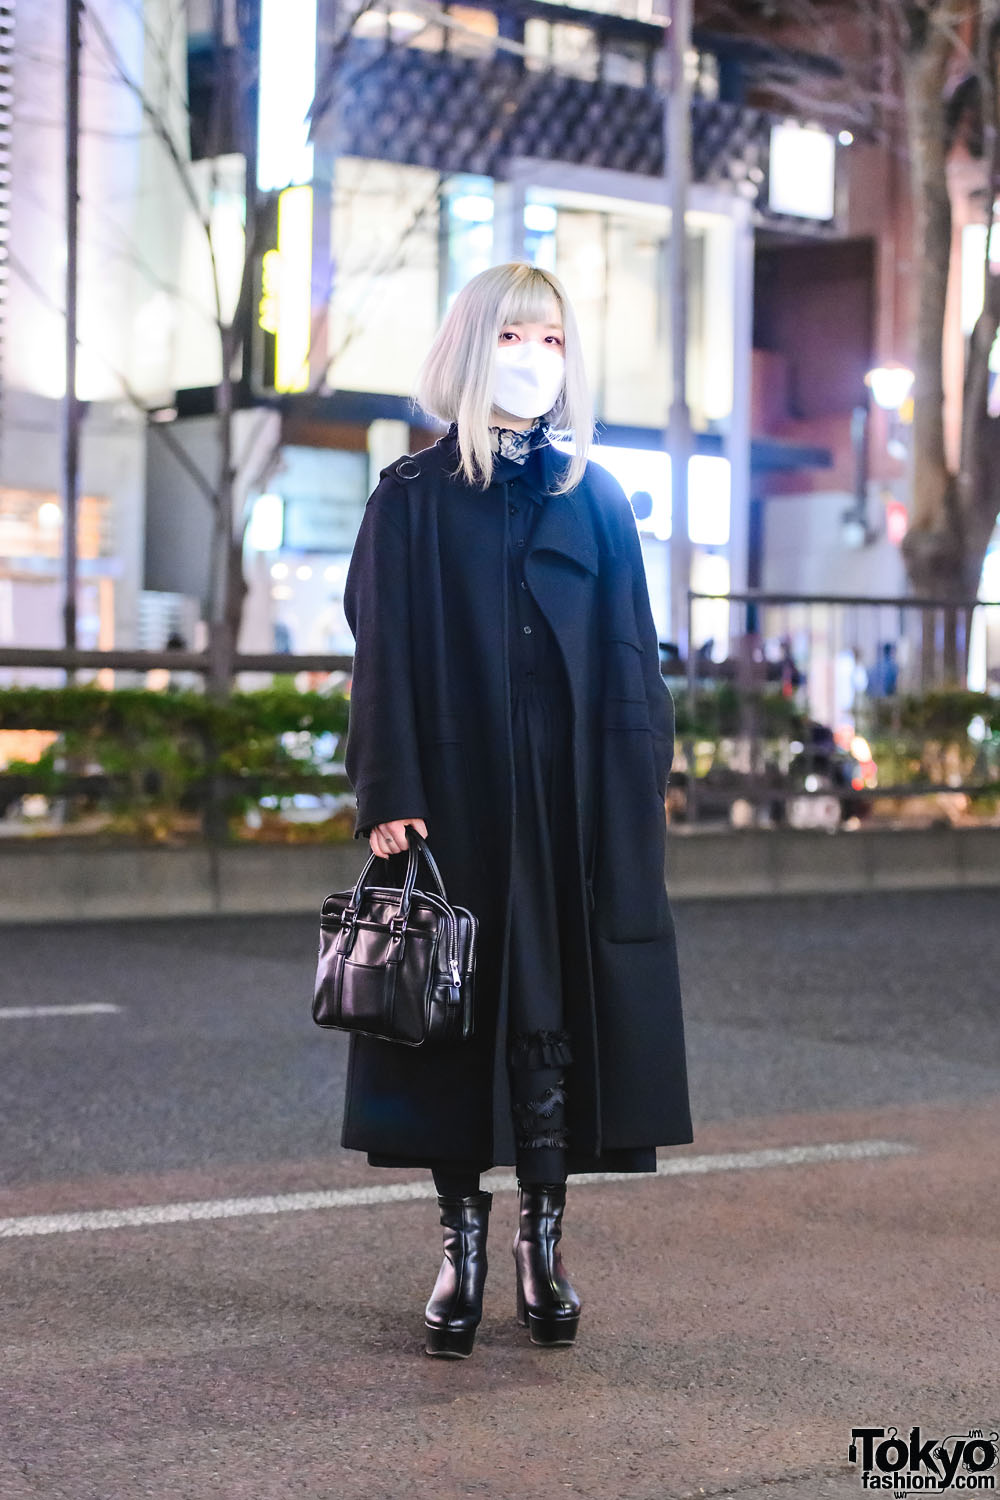 Tokyo Fashion College Student w/ Silver Hair In All Black Comme Des Garcons & Merry Jenny Ankle Boots